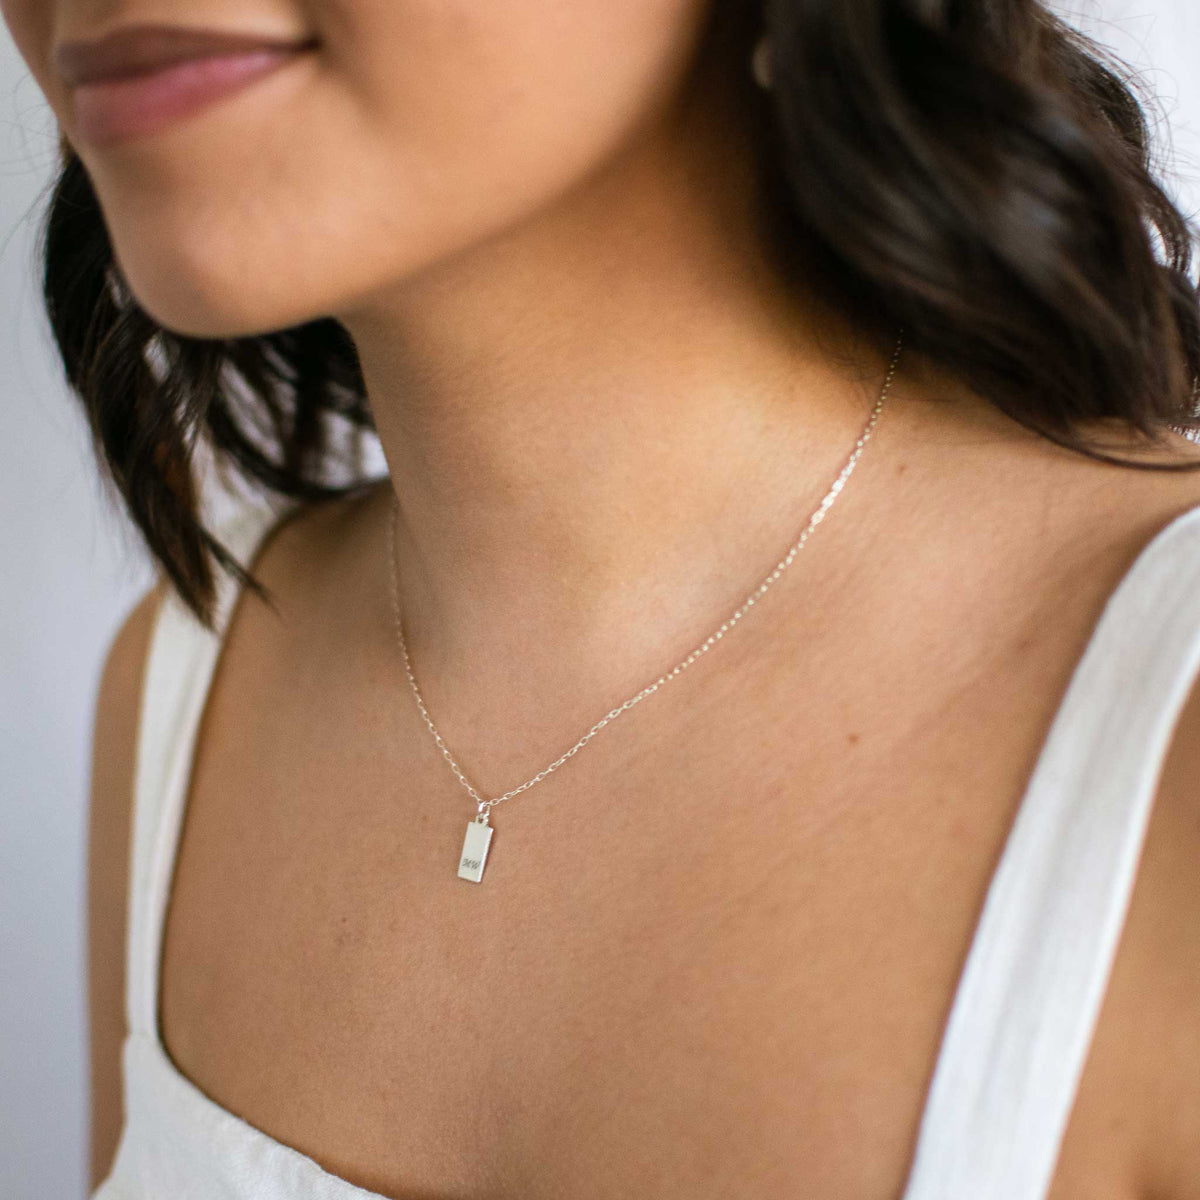 Model wearing a small silver tag necklace with mw engraved.